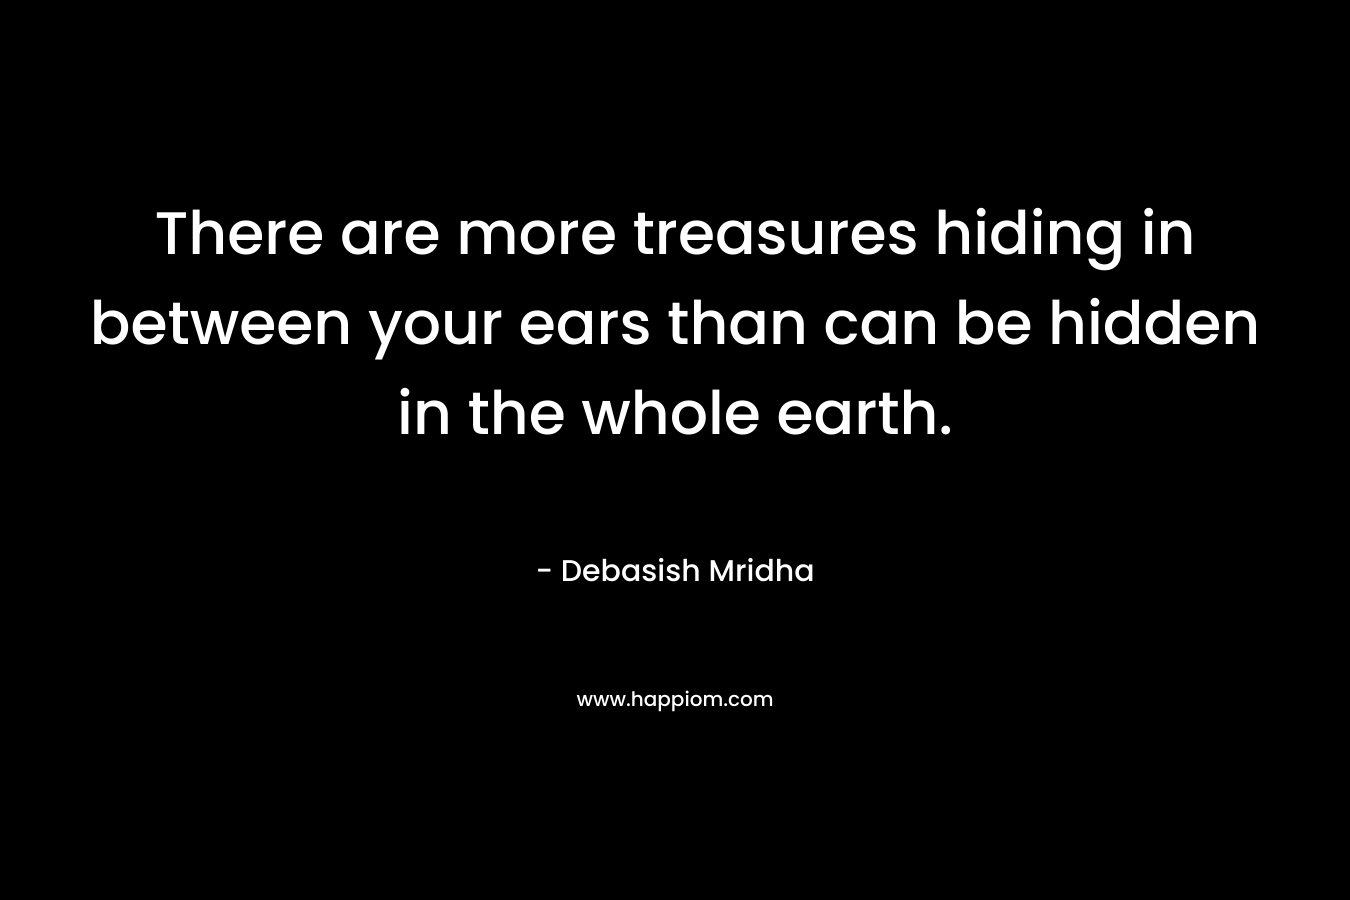 There are more treasures hiding in between your ears than can be hidden in the whole earth.